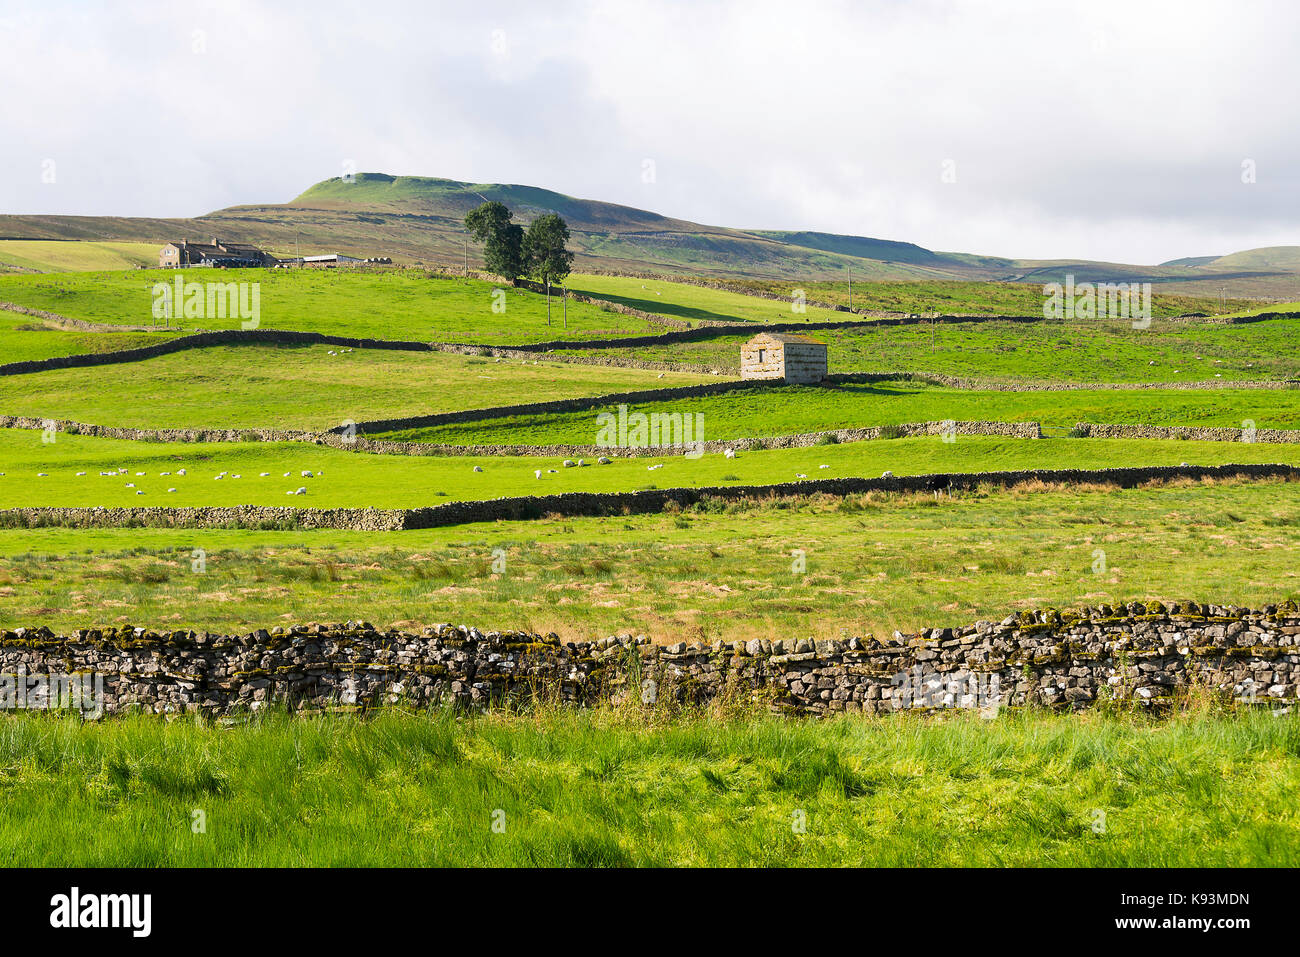 The View Towards Gayle and Dodd Fell from Bainbridge in the Yorkshire Dales National Park Yorkshire England United Kingdom UK Stock Photo